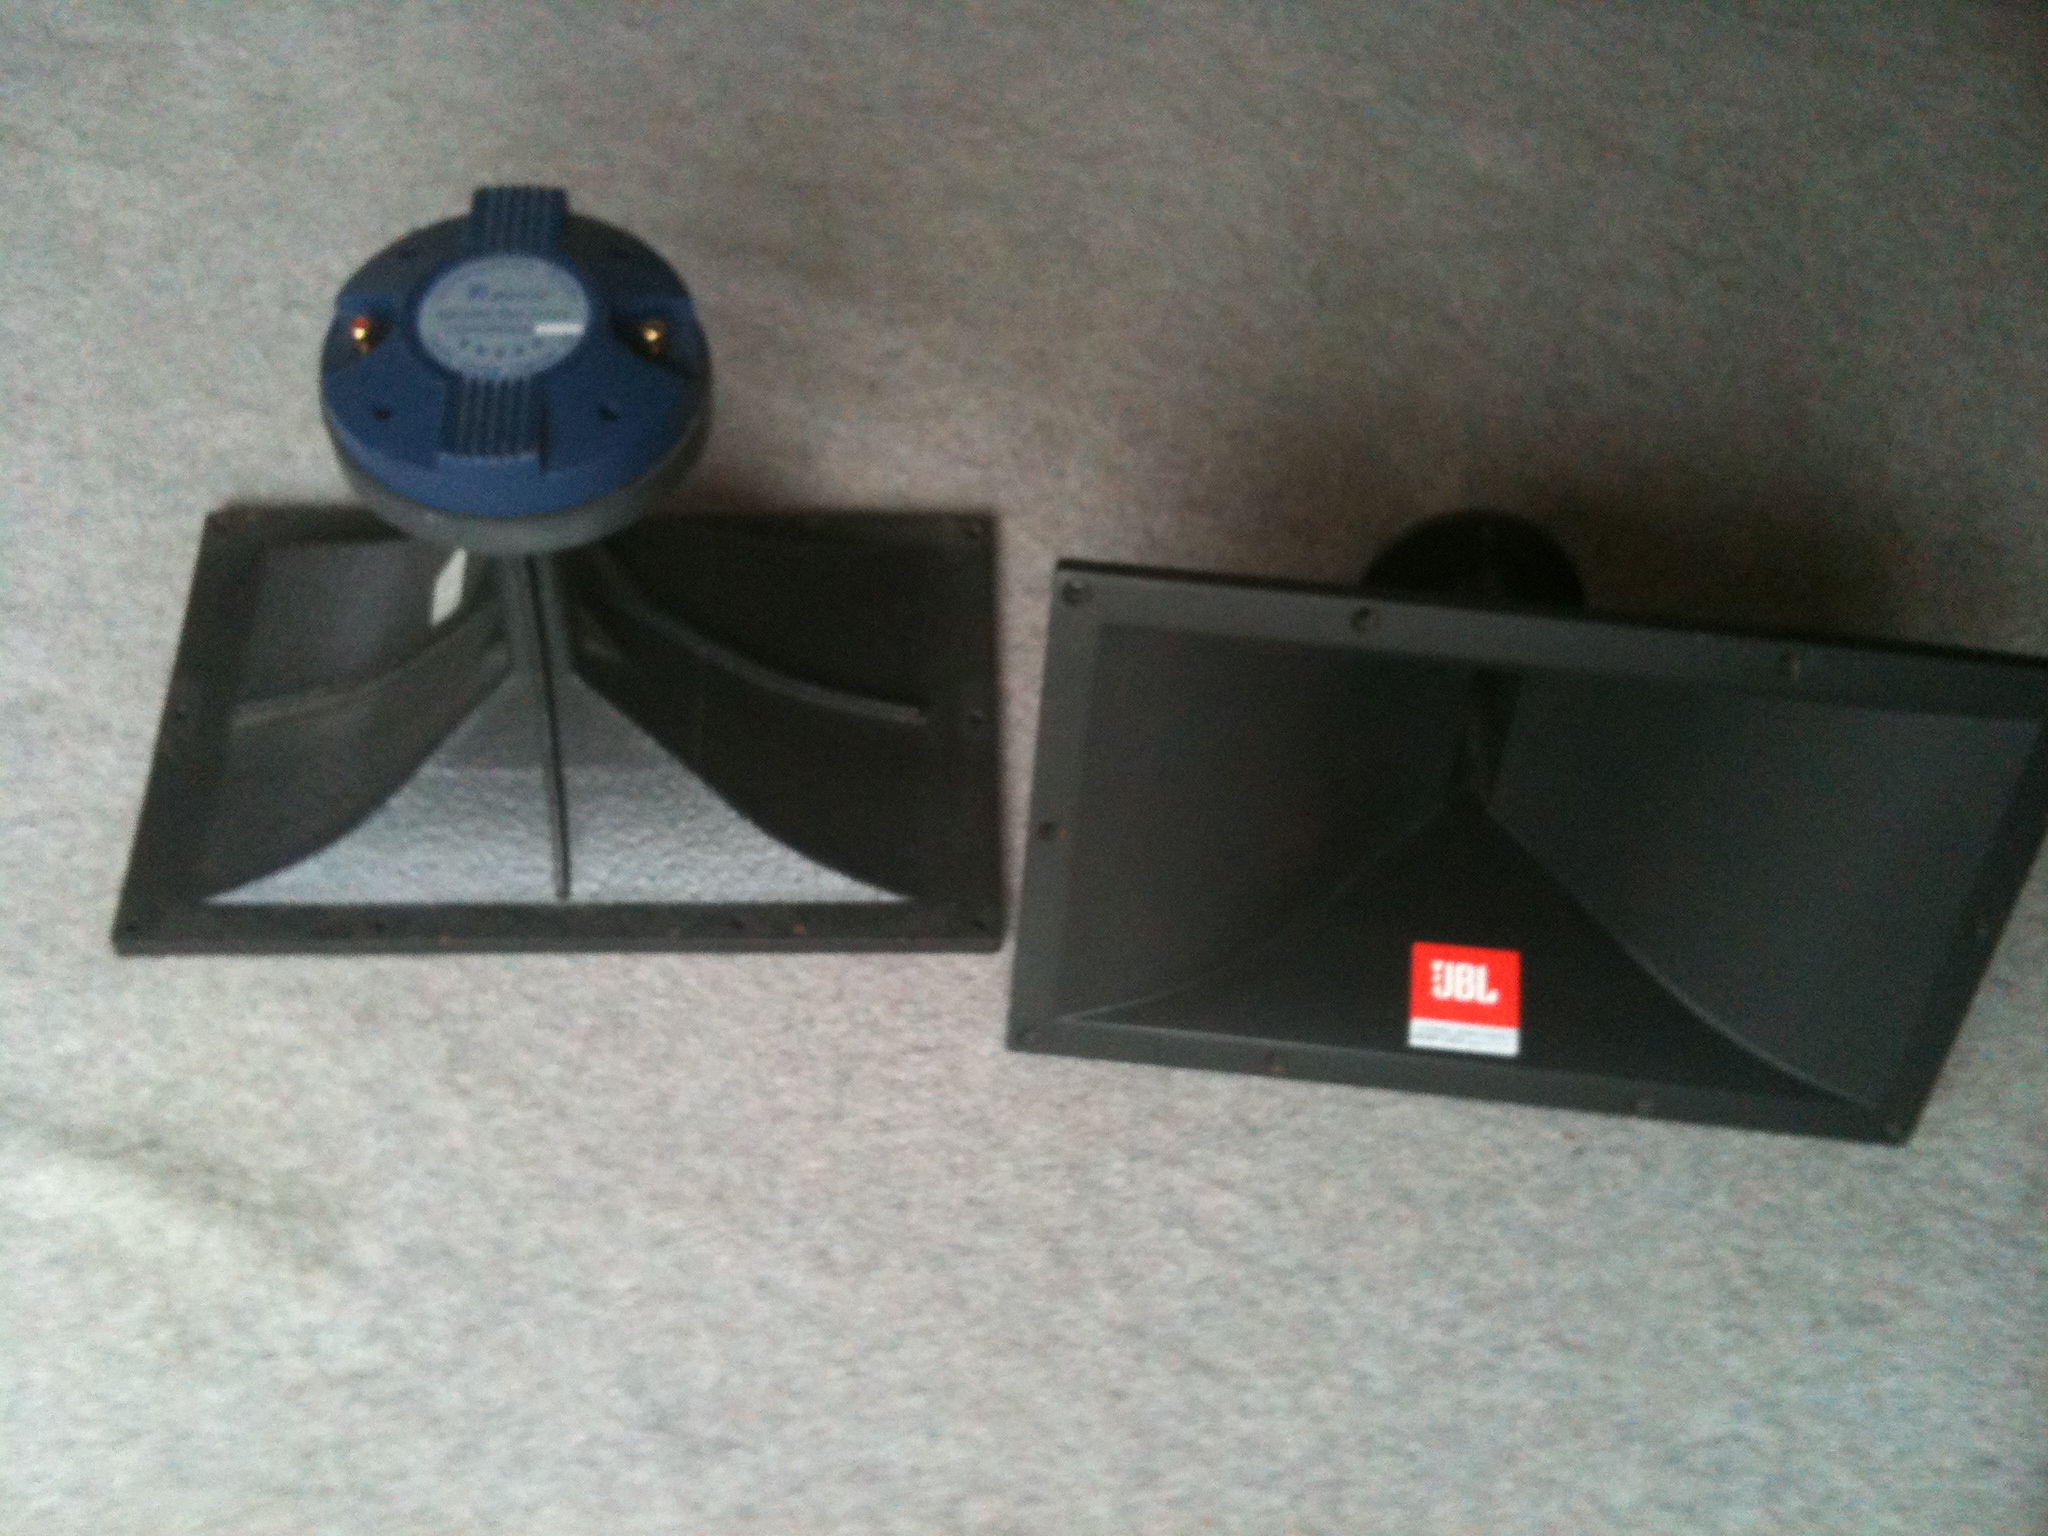 JBL2380 and P.audio BMD750 drivers